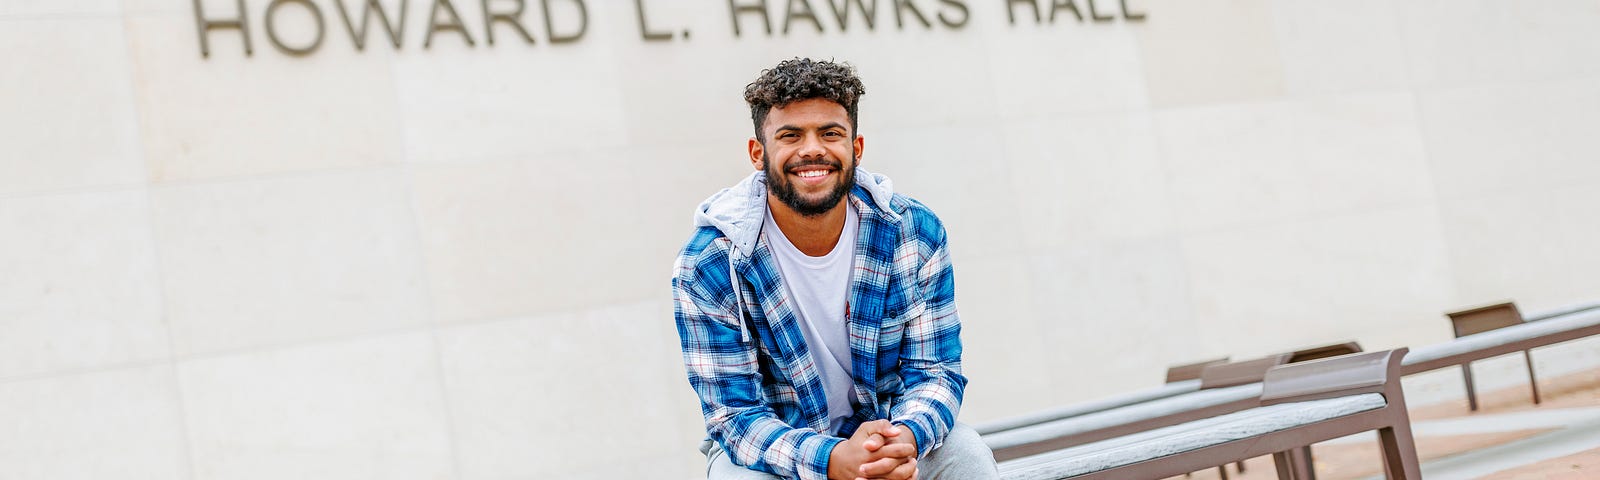 Derek smiles for a photo on the benches outside of Hawks Hall